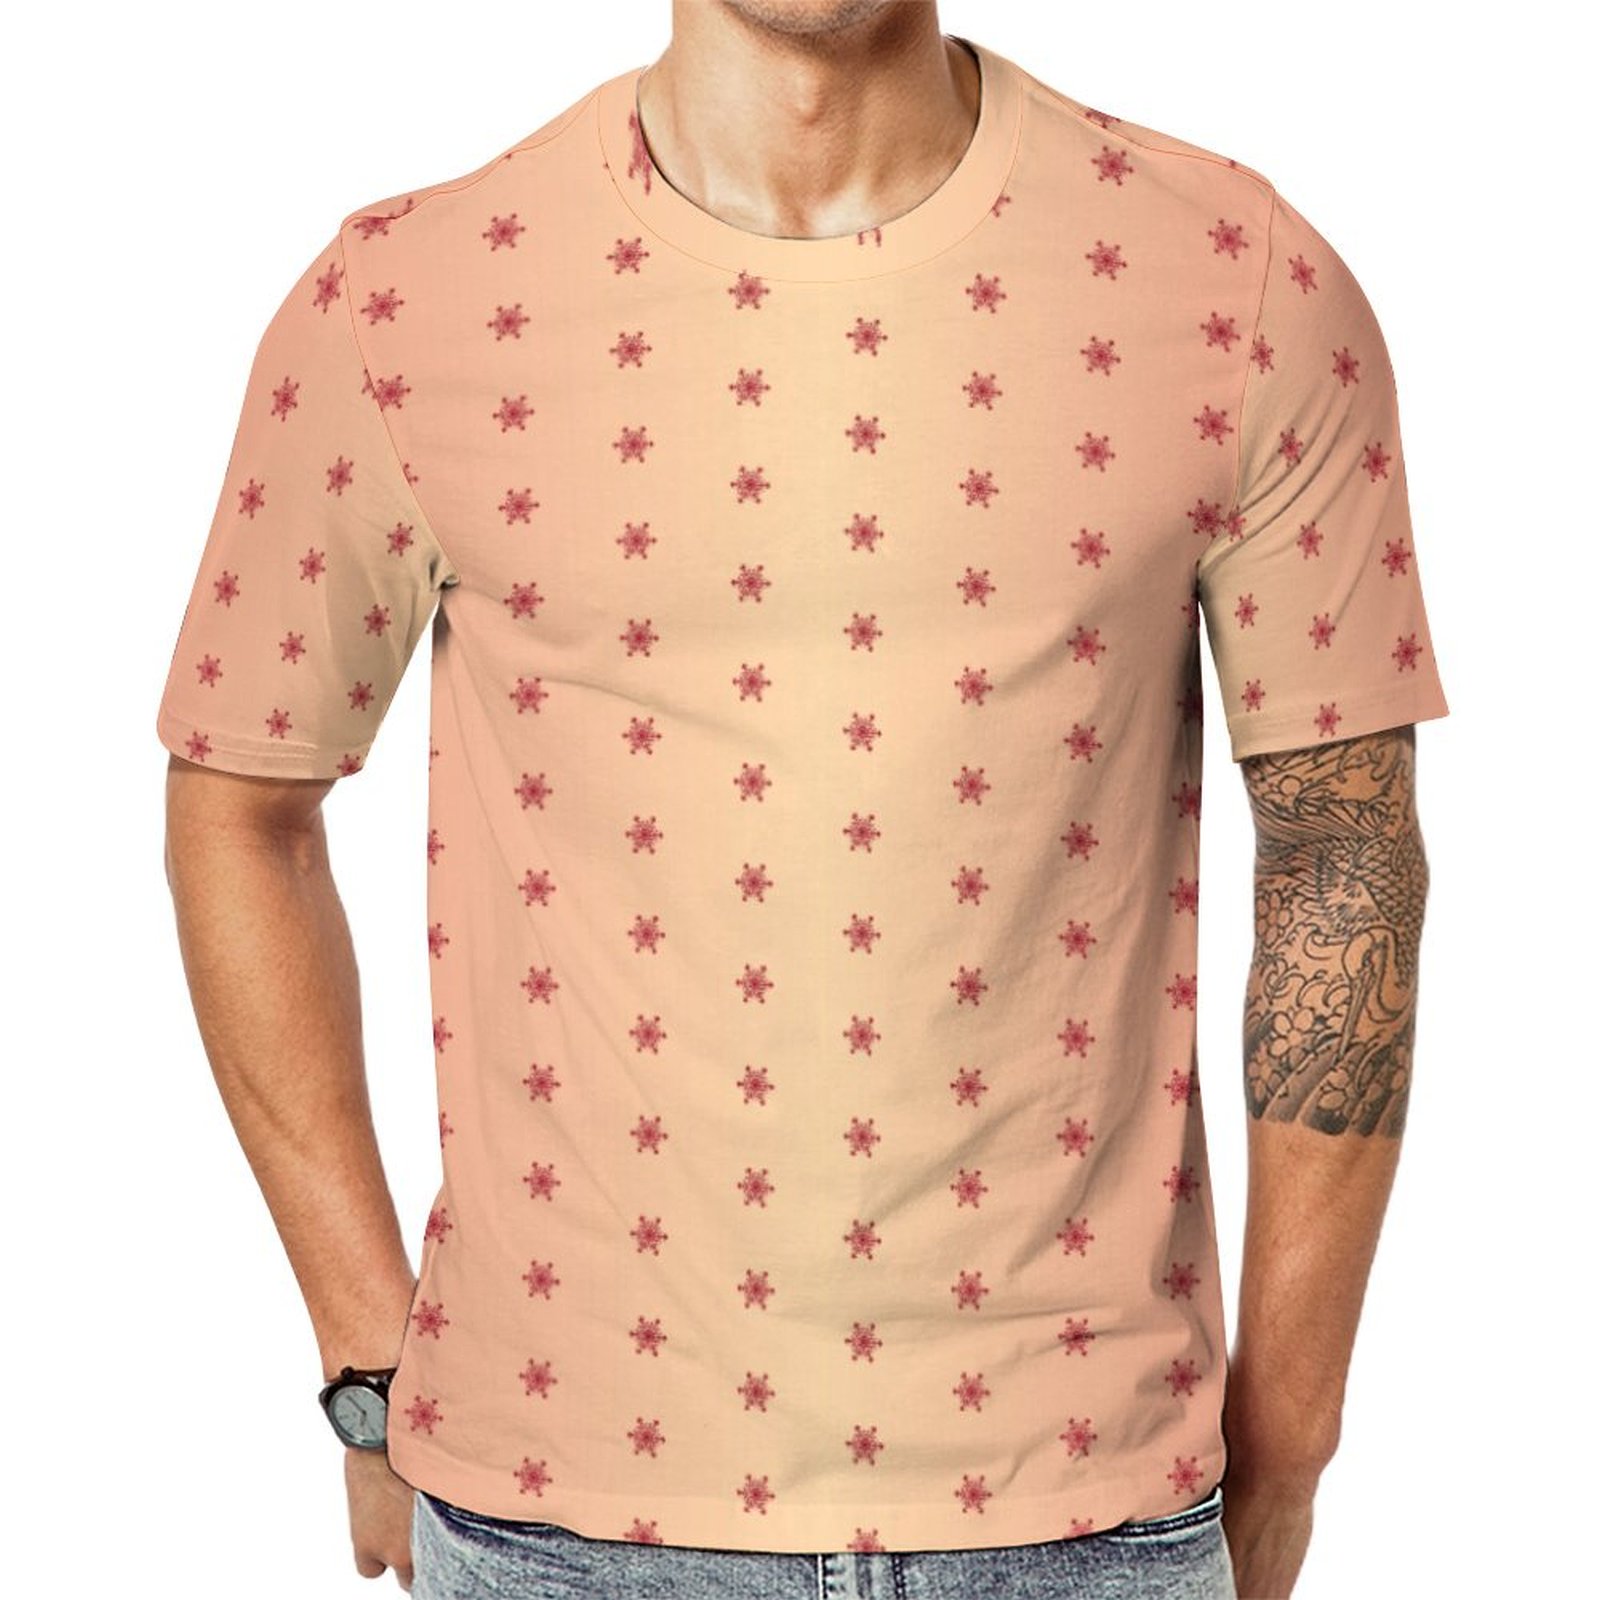 Red Festive Red Metallic Snowflake Short Sleeve Print Unisex Tshirt Summer Casual Tees for Men and Women Coolcoshirts